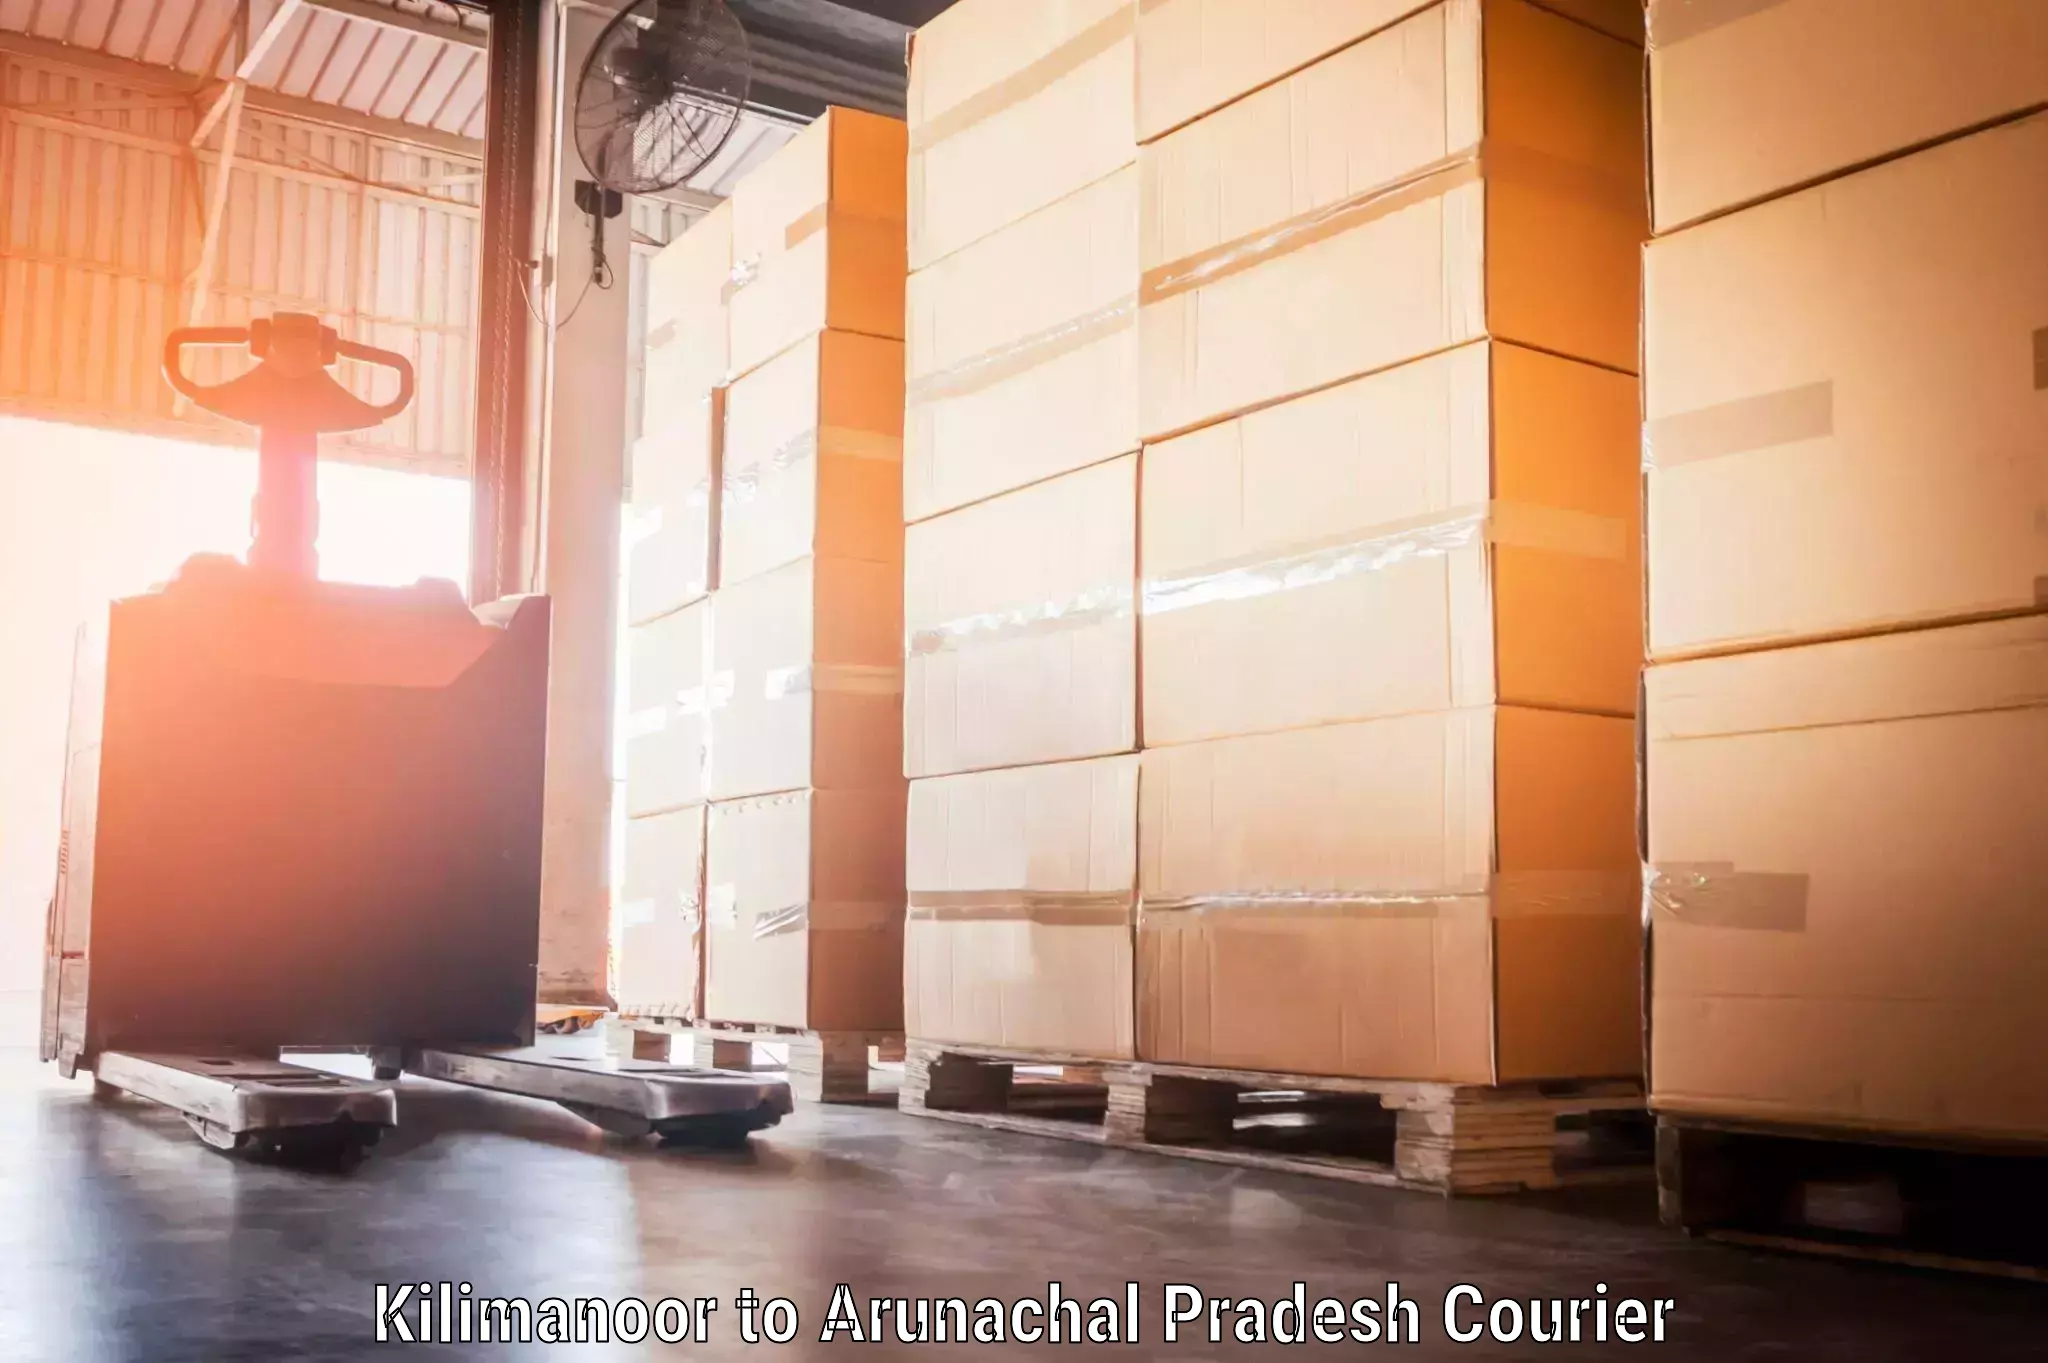 Baggage shipping experts Kilimanoor to Lohit